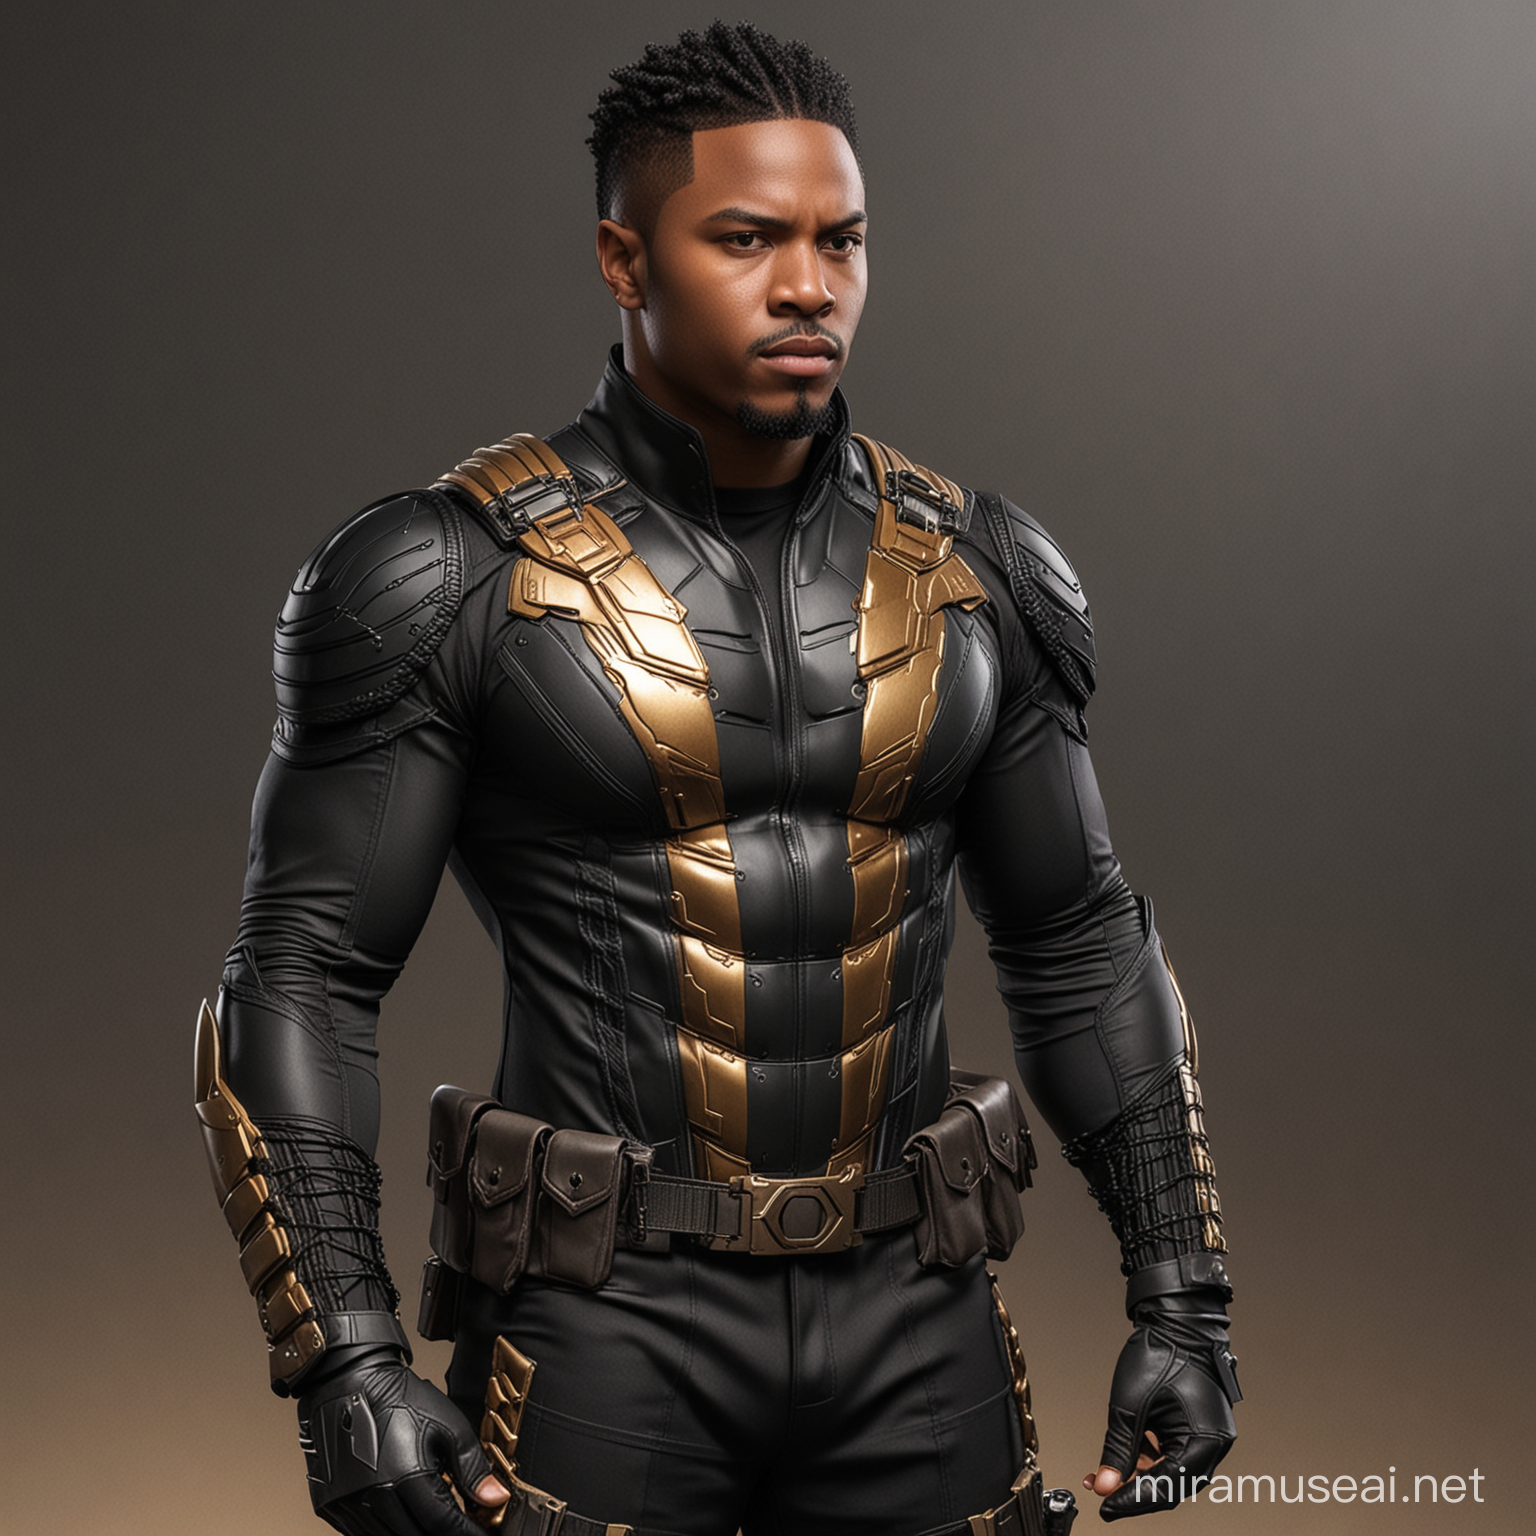 African American film producer Victor Foh Jr as Nix Uotan, DC Comics Nix Uotan, hyper realistic, 8K, comic accurate suit, Victor Foh Jr dressed in all black form fitting tactical bodysuit underneath a black  tactical trench coat with metallic gold accents, Victor Foh Jr as comic accurate Nix Uotan, cornrows with faded sides 